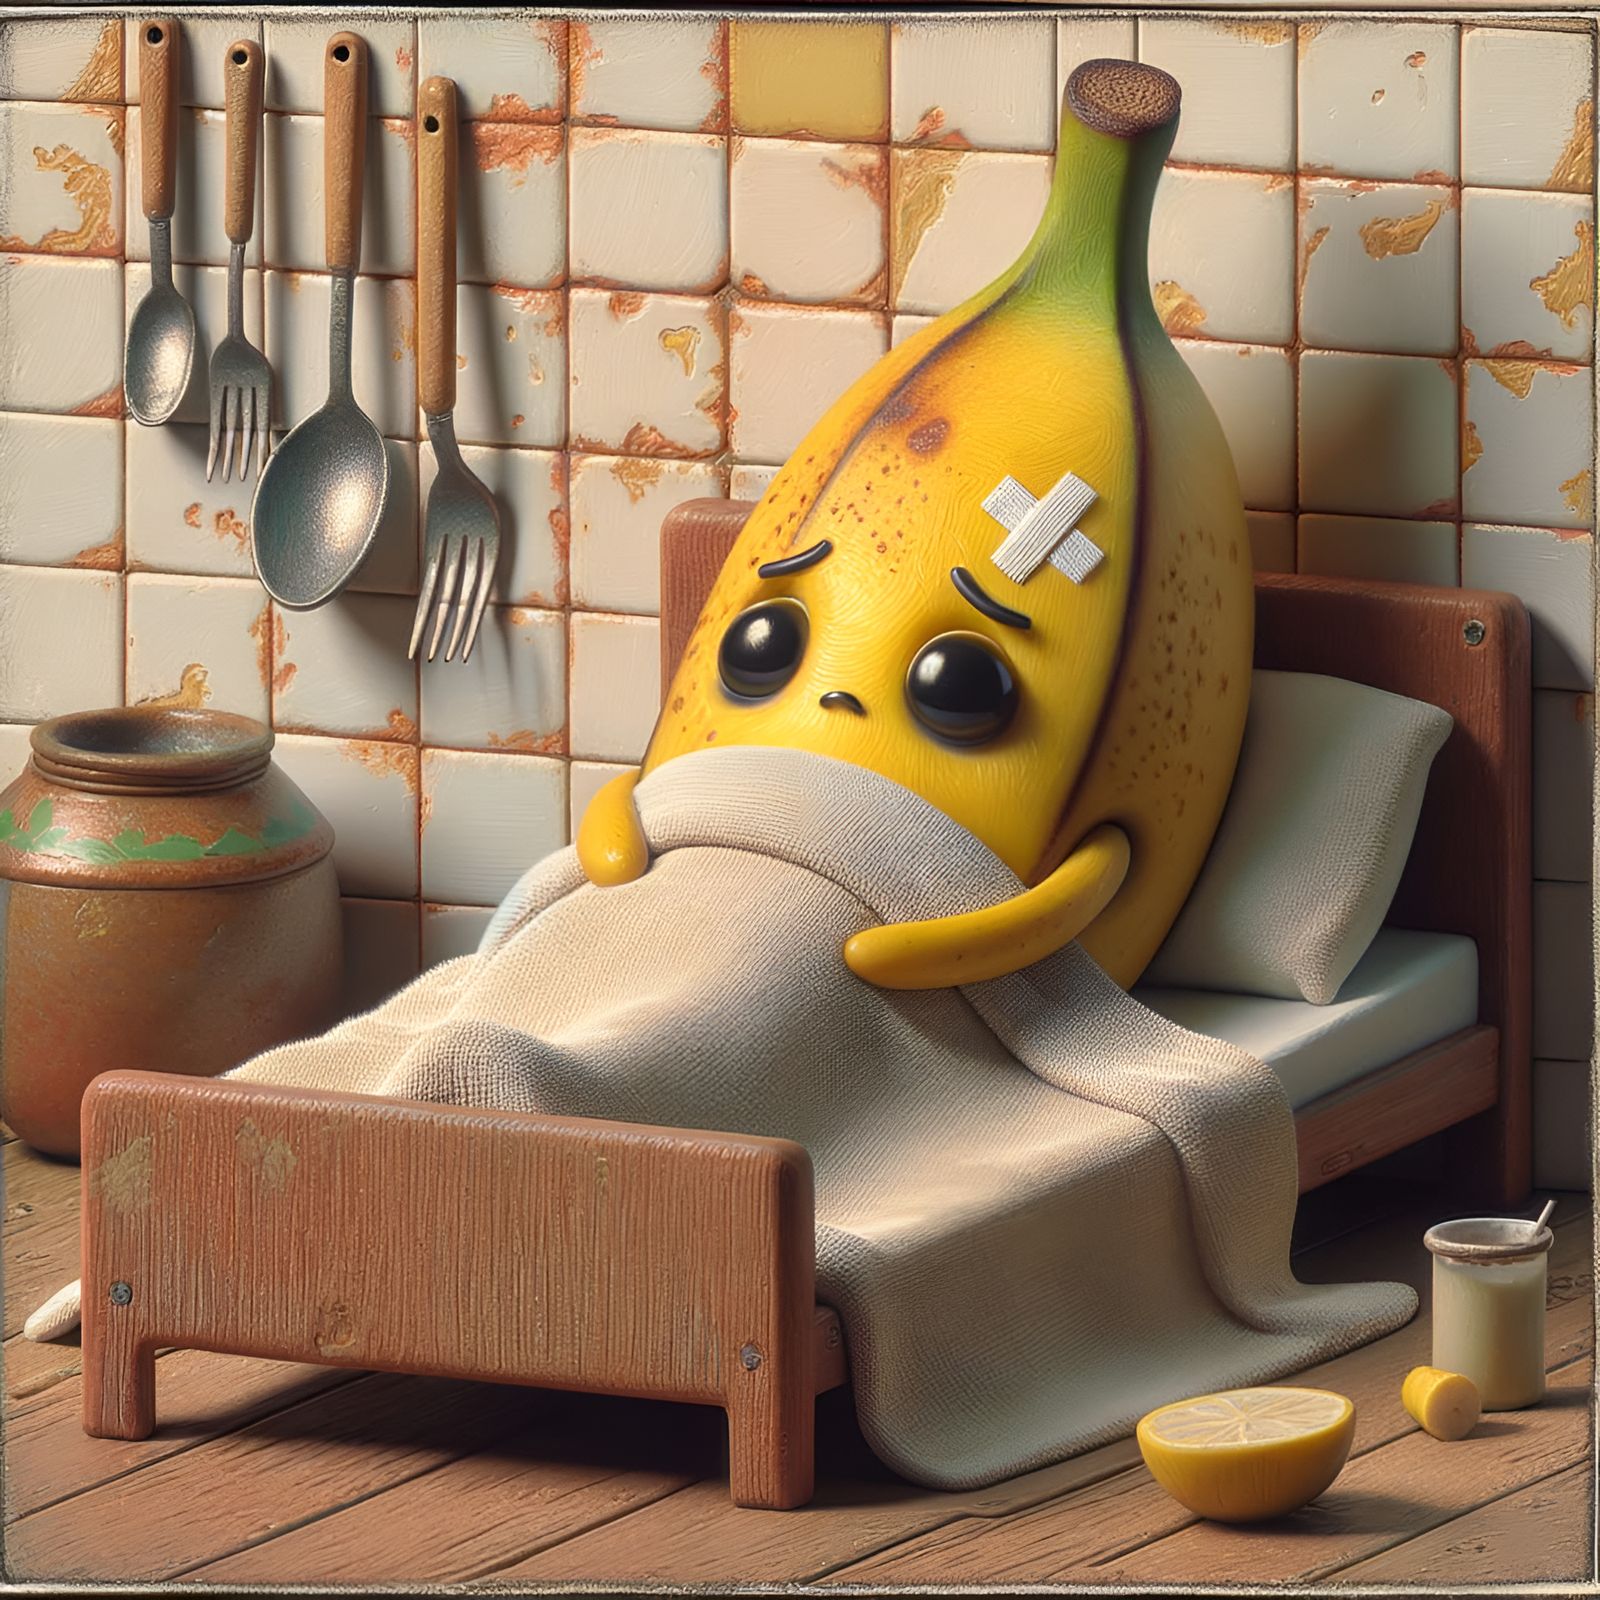 "I'm not peeling very well today."